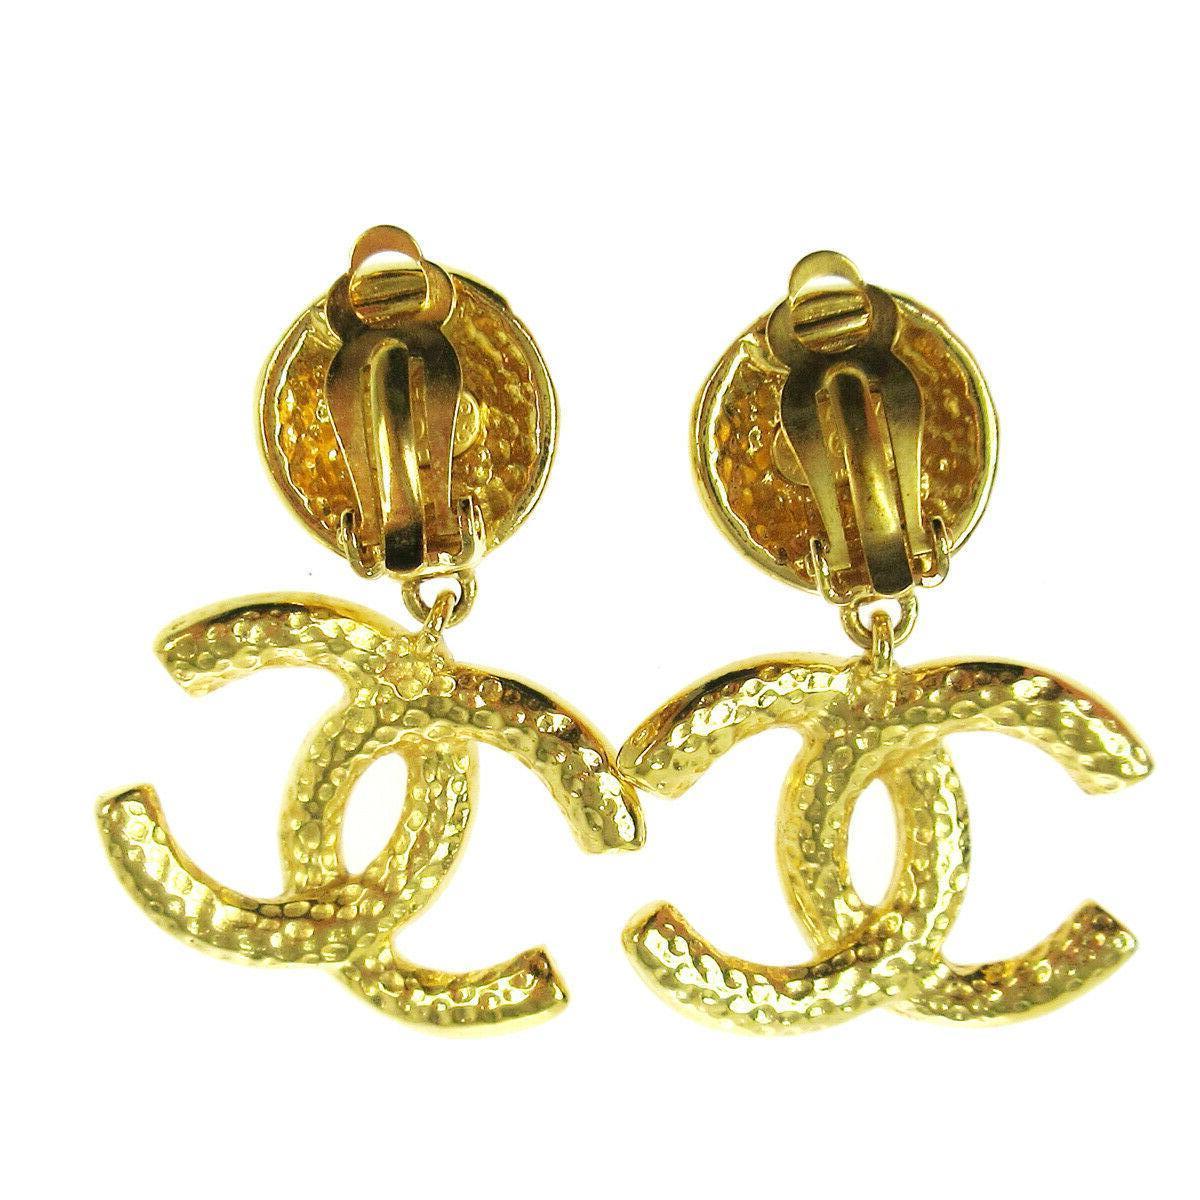 Chanel Gold Nugget CC Charm Evening Dangle Drop Evening Earrings

Metal
Gold tone hardware
Clip on closure
Made in France
Width 1